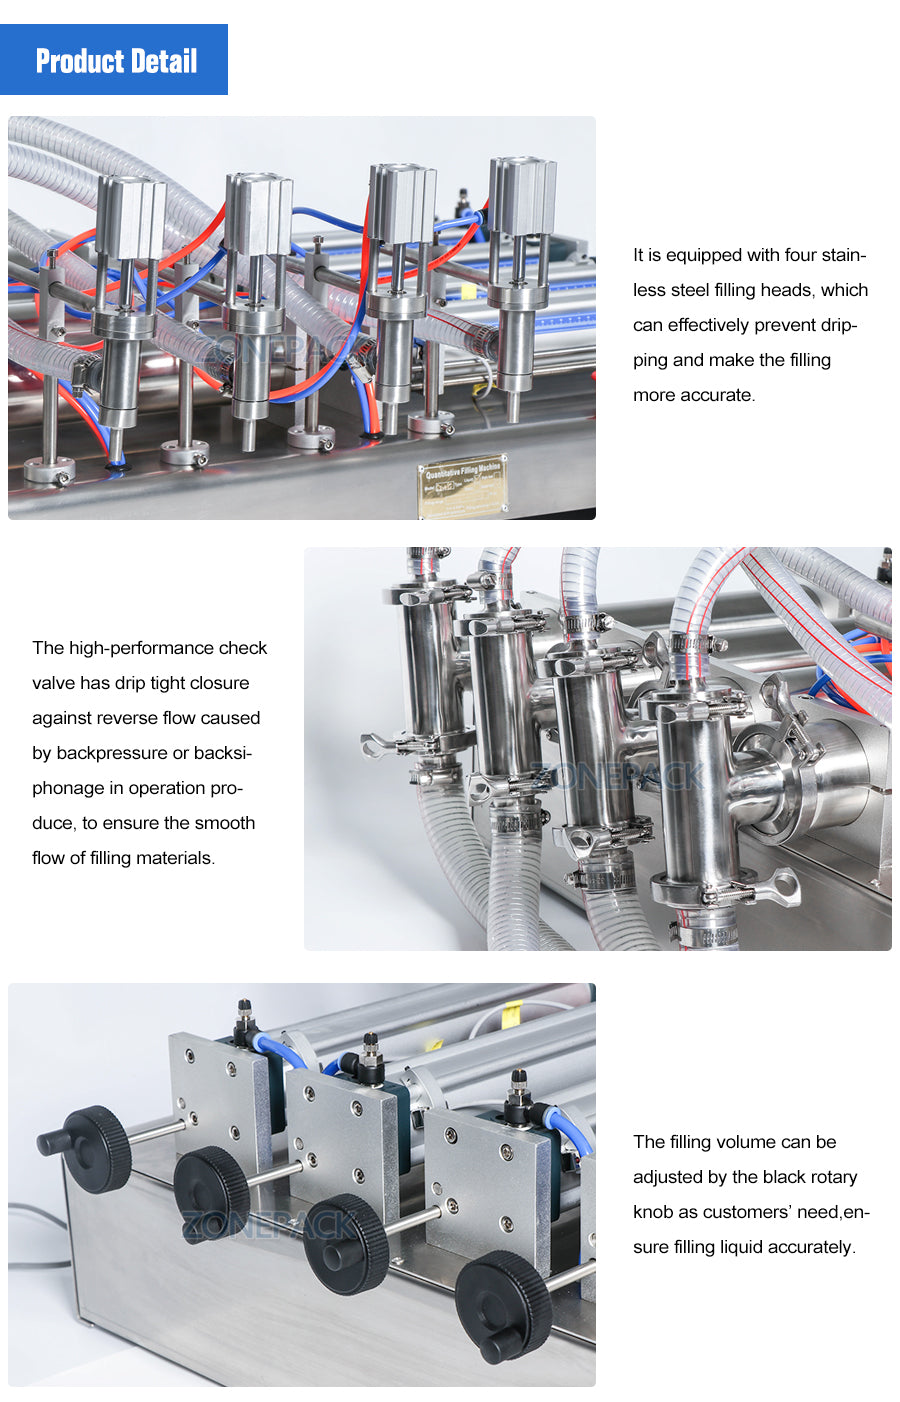 ZONEPACK 4 Heads Pneumatic Auto Filling Machine Horizontal Essential Oil water Perfume filler Food Beverage Machinery 4 Nozzles